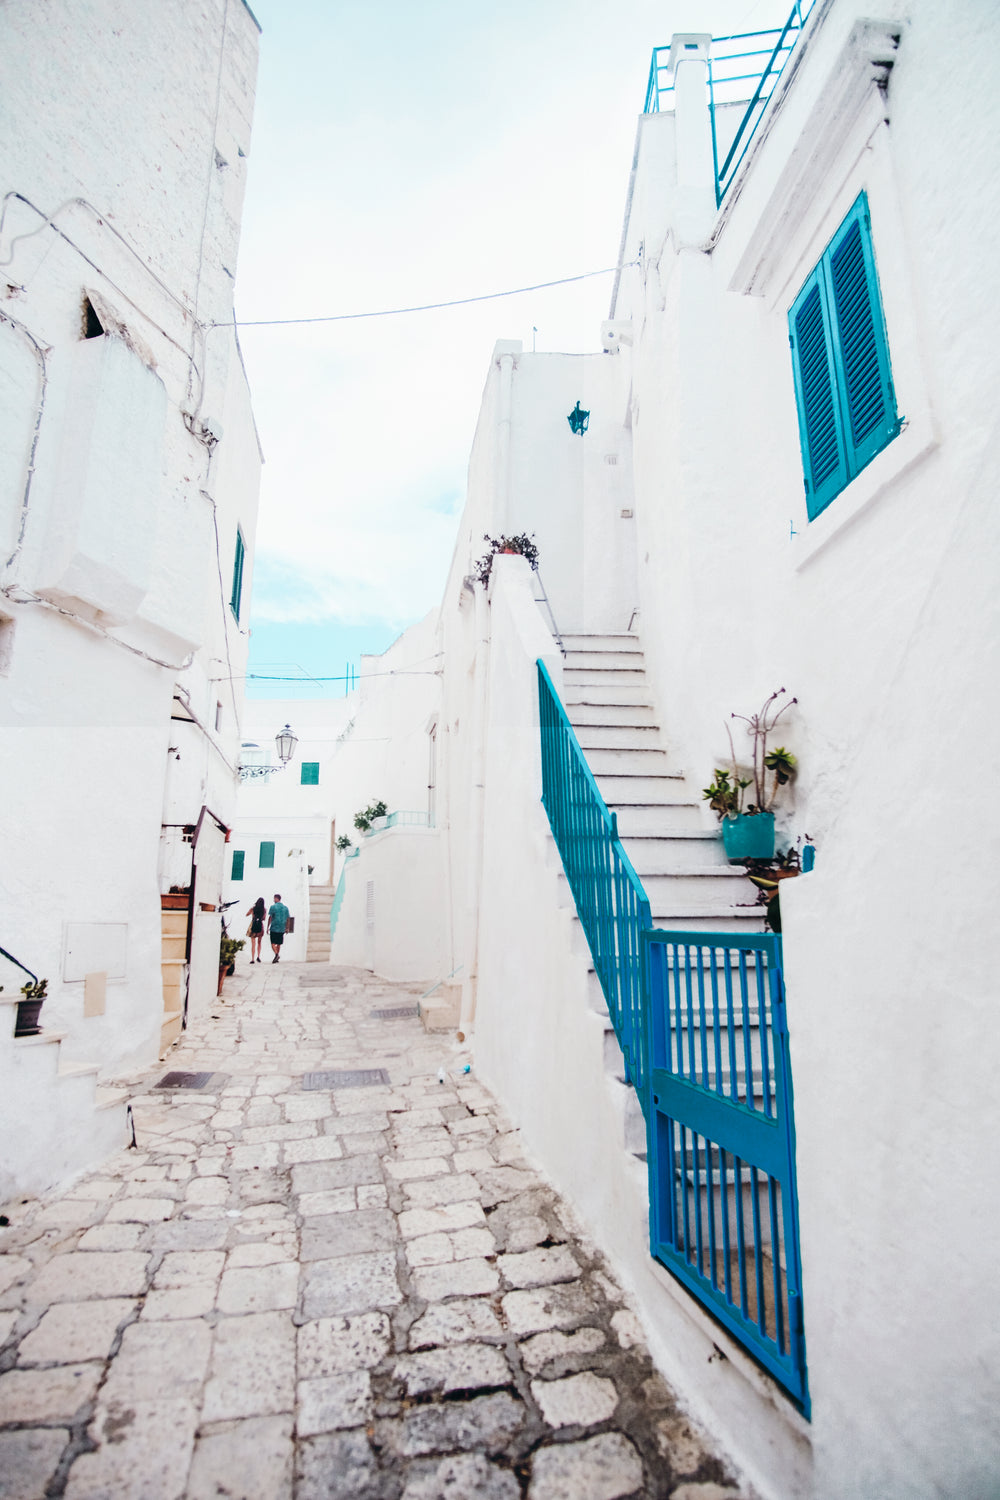 two people walking around white buildings and blue shutters